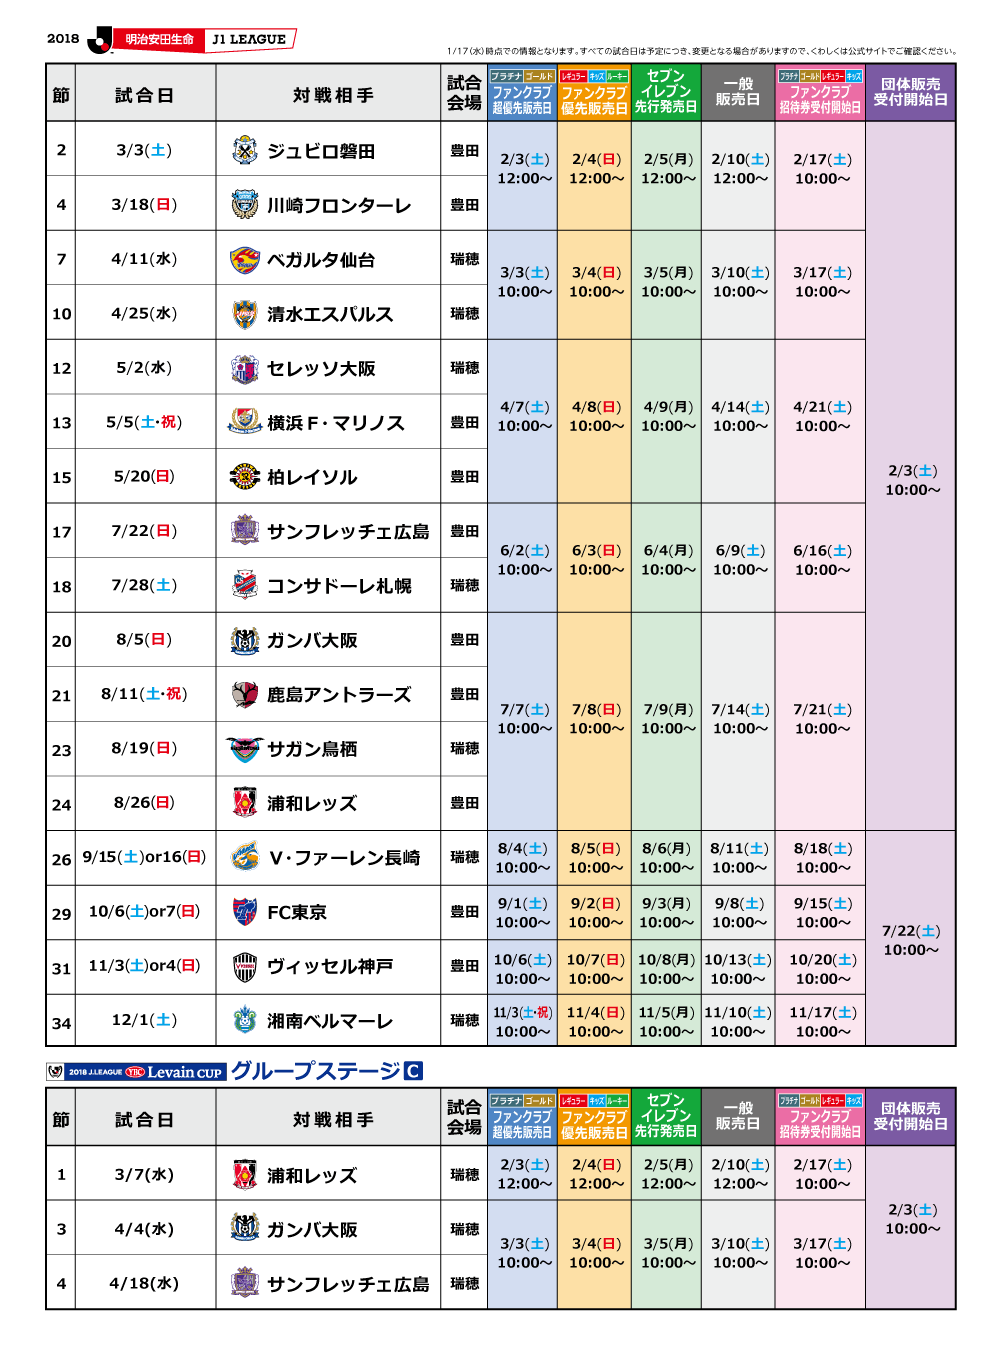 2018_schedule_new.png